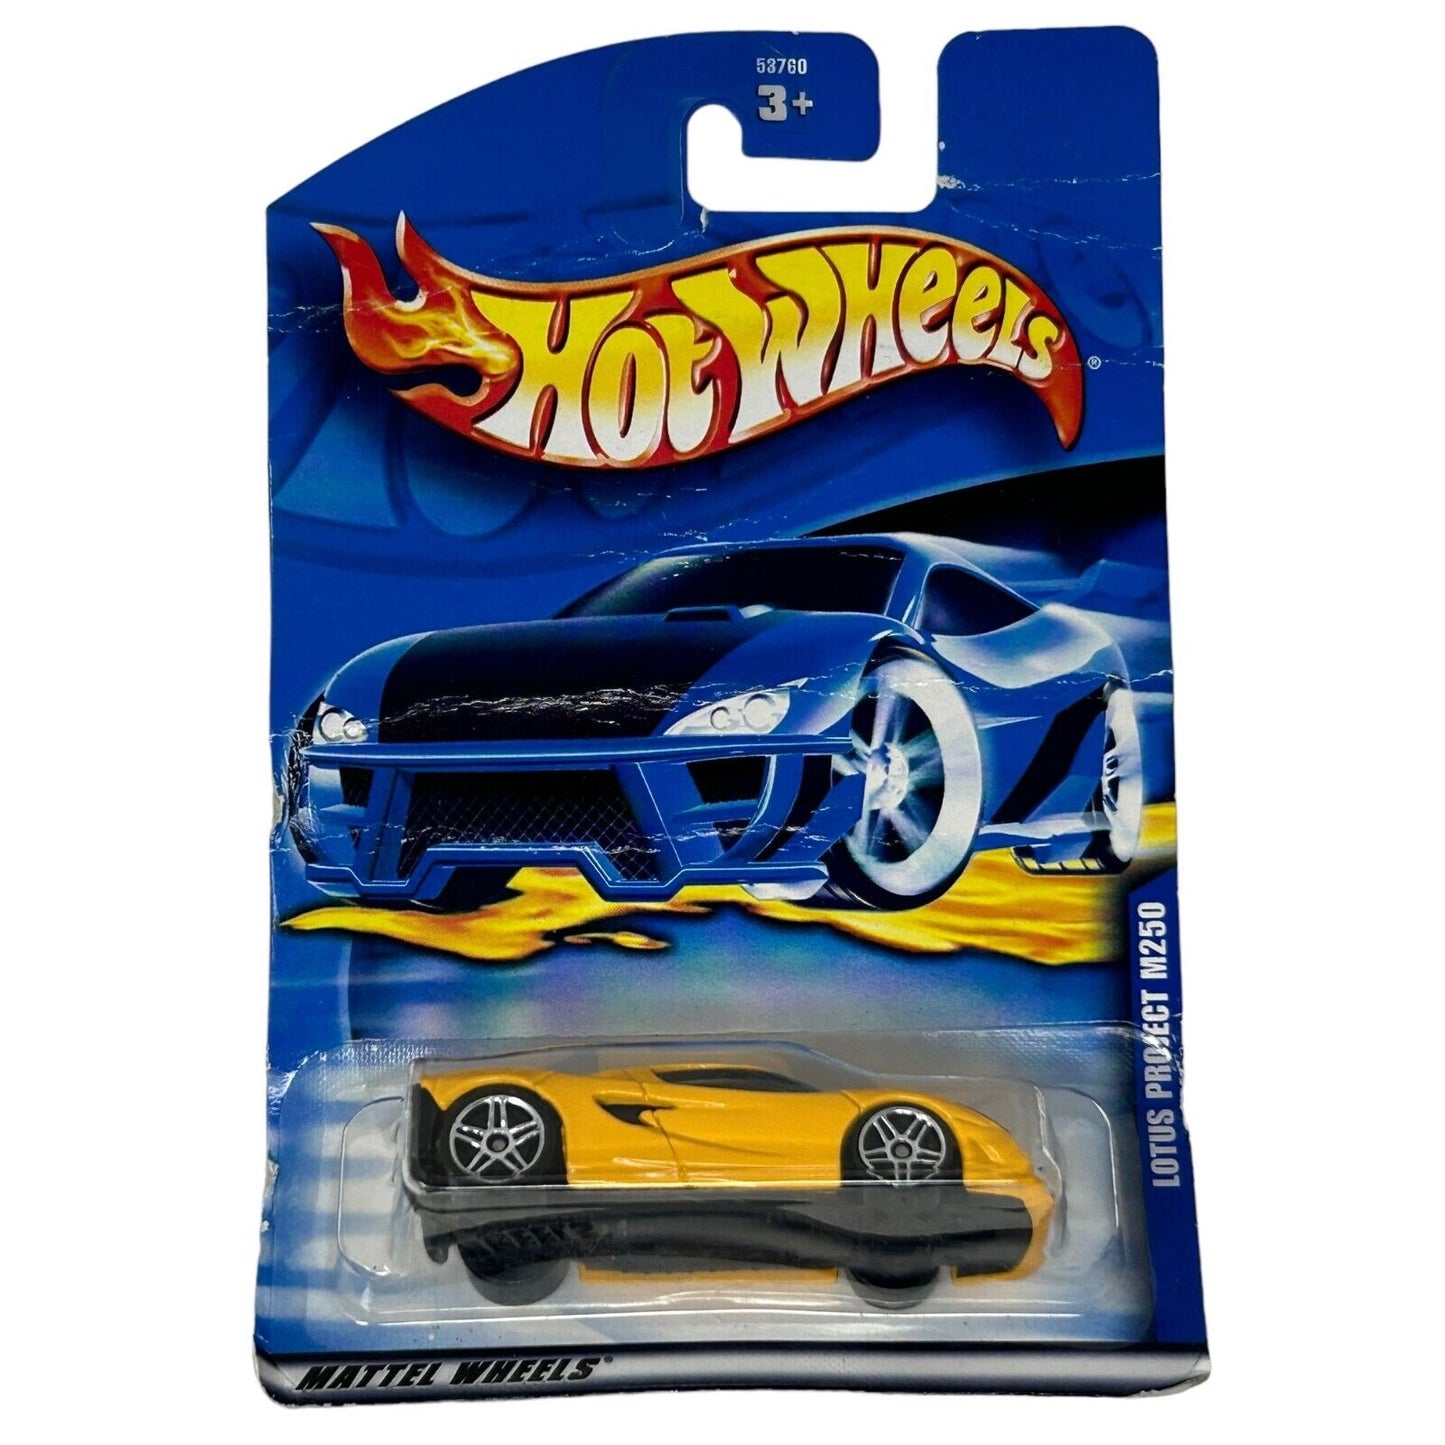 Lotus Project M250 Hot Wheels Collectible Diecast Car Yellow Vintage 2001 New